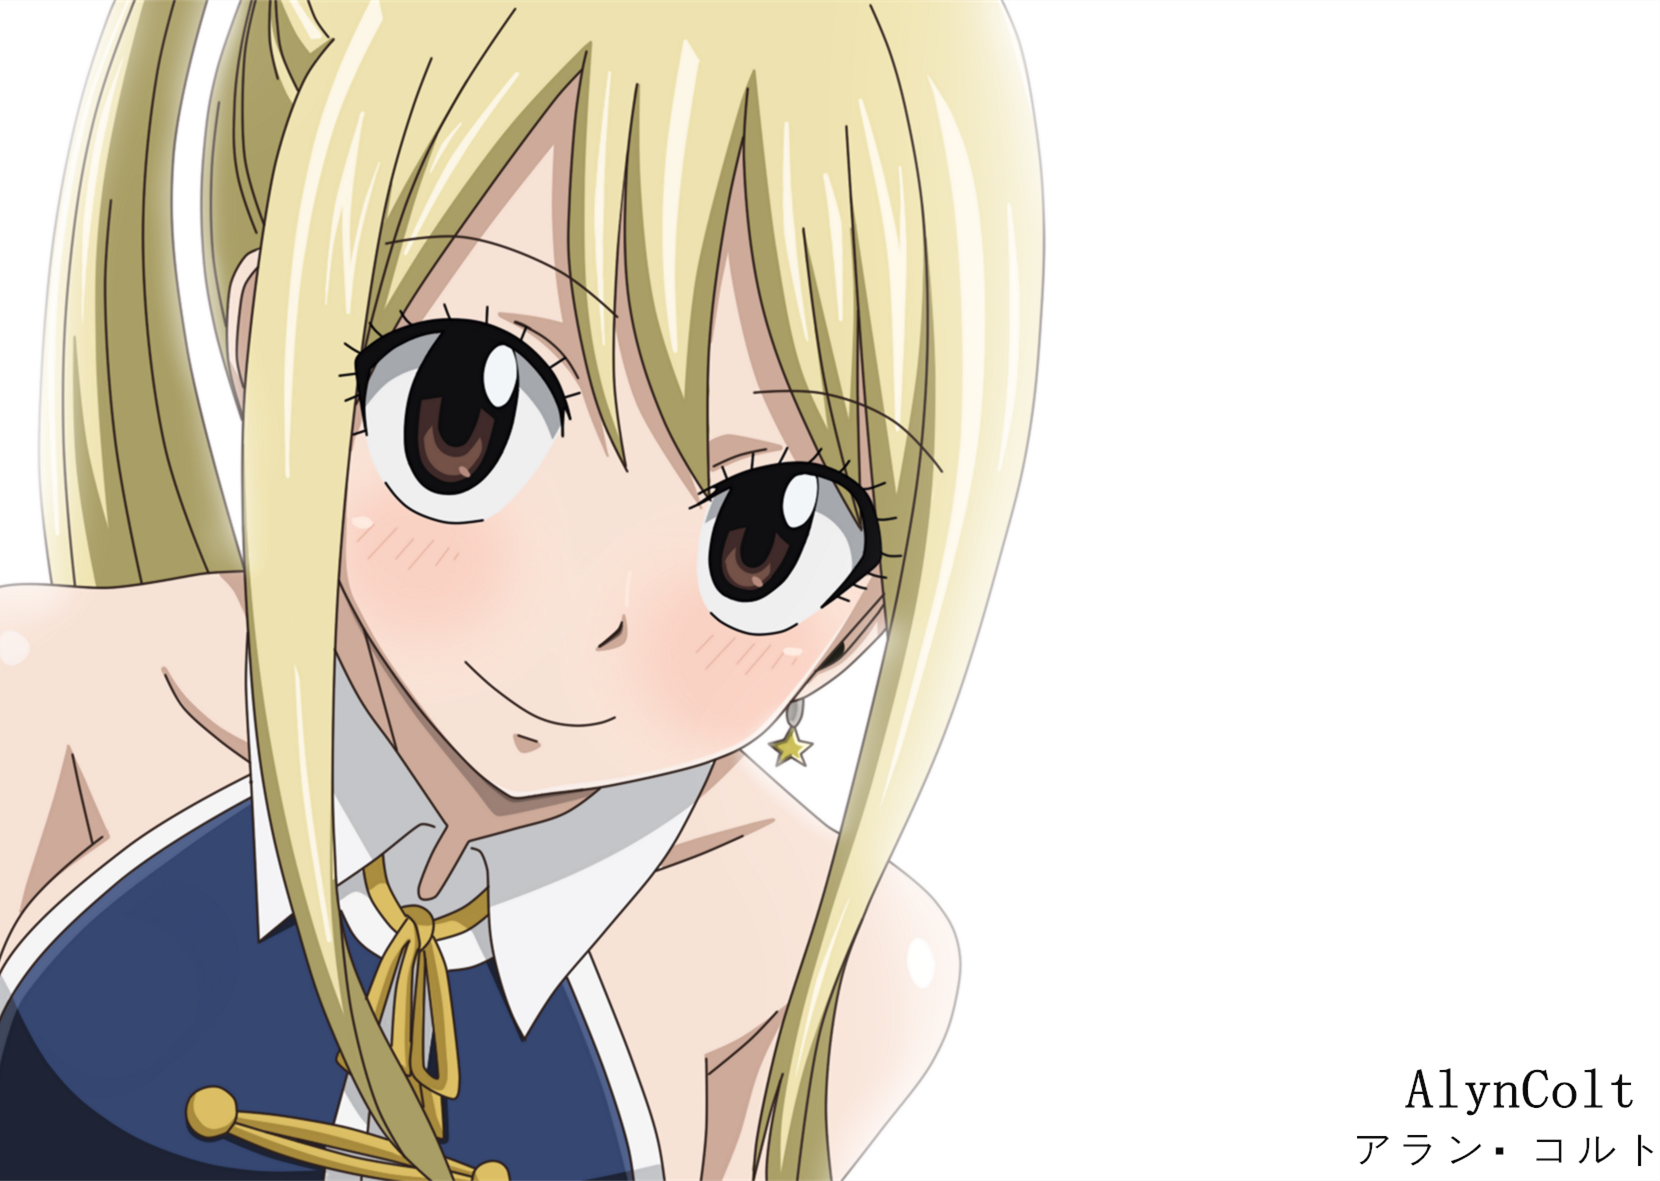 3. "Lucy Heartfilia" from Fairy Tail - wide 7